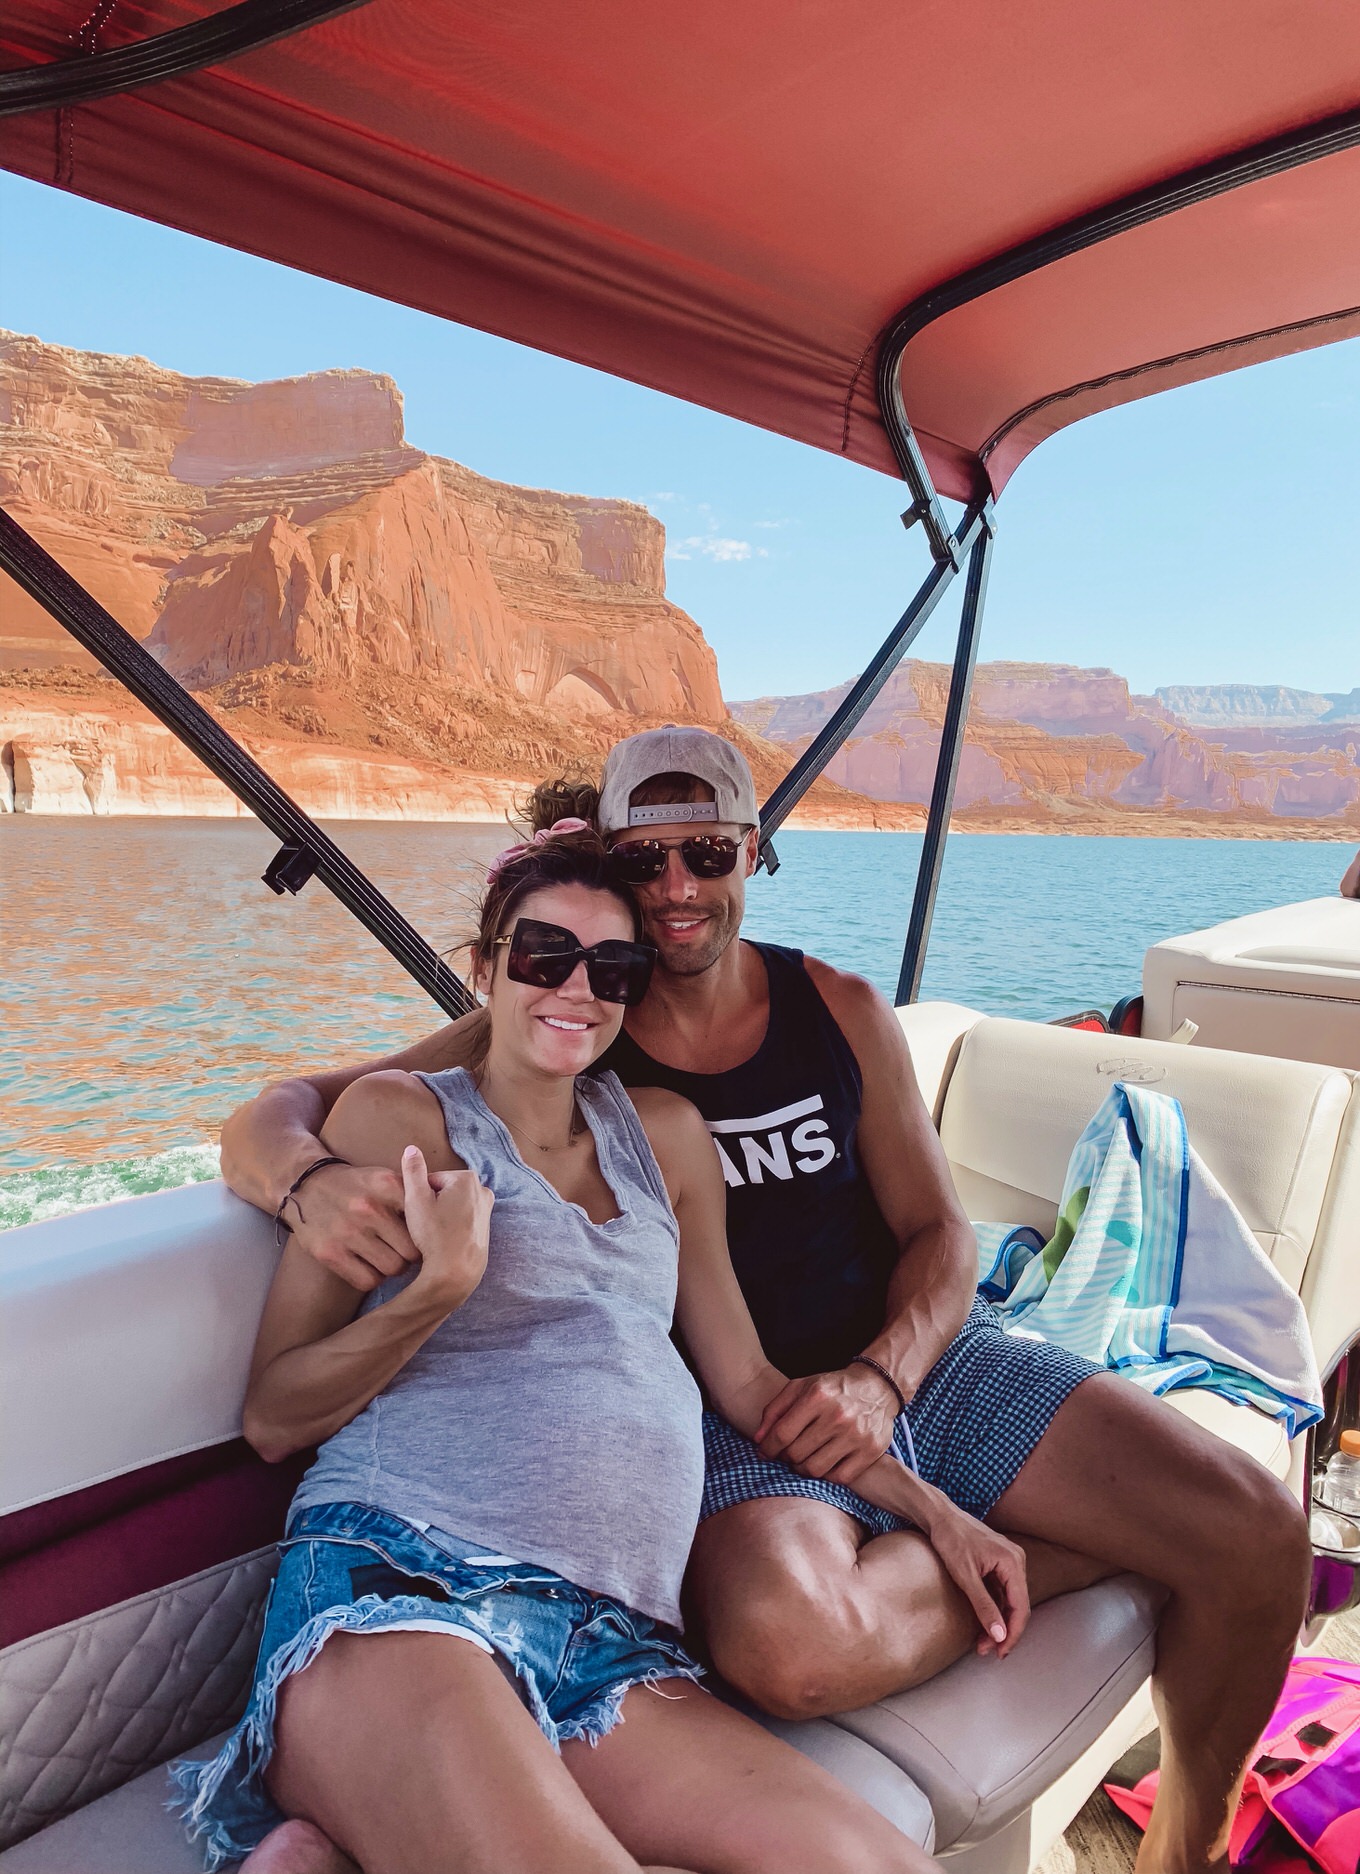 christine and cody andrew riding boat in lake powell